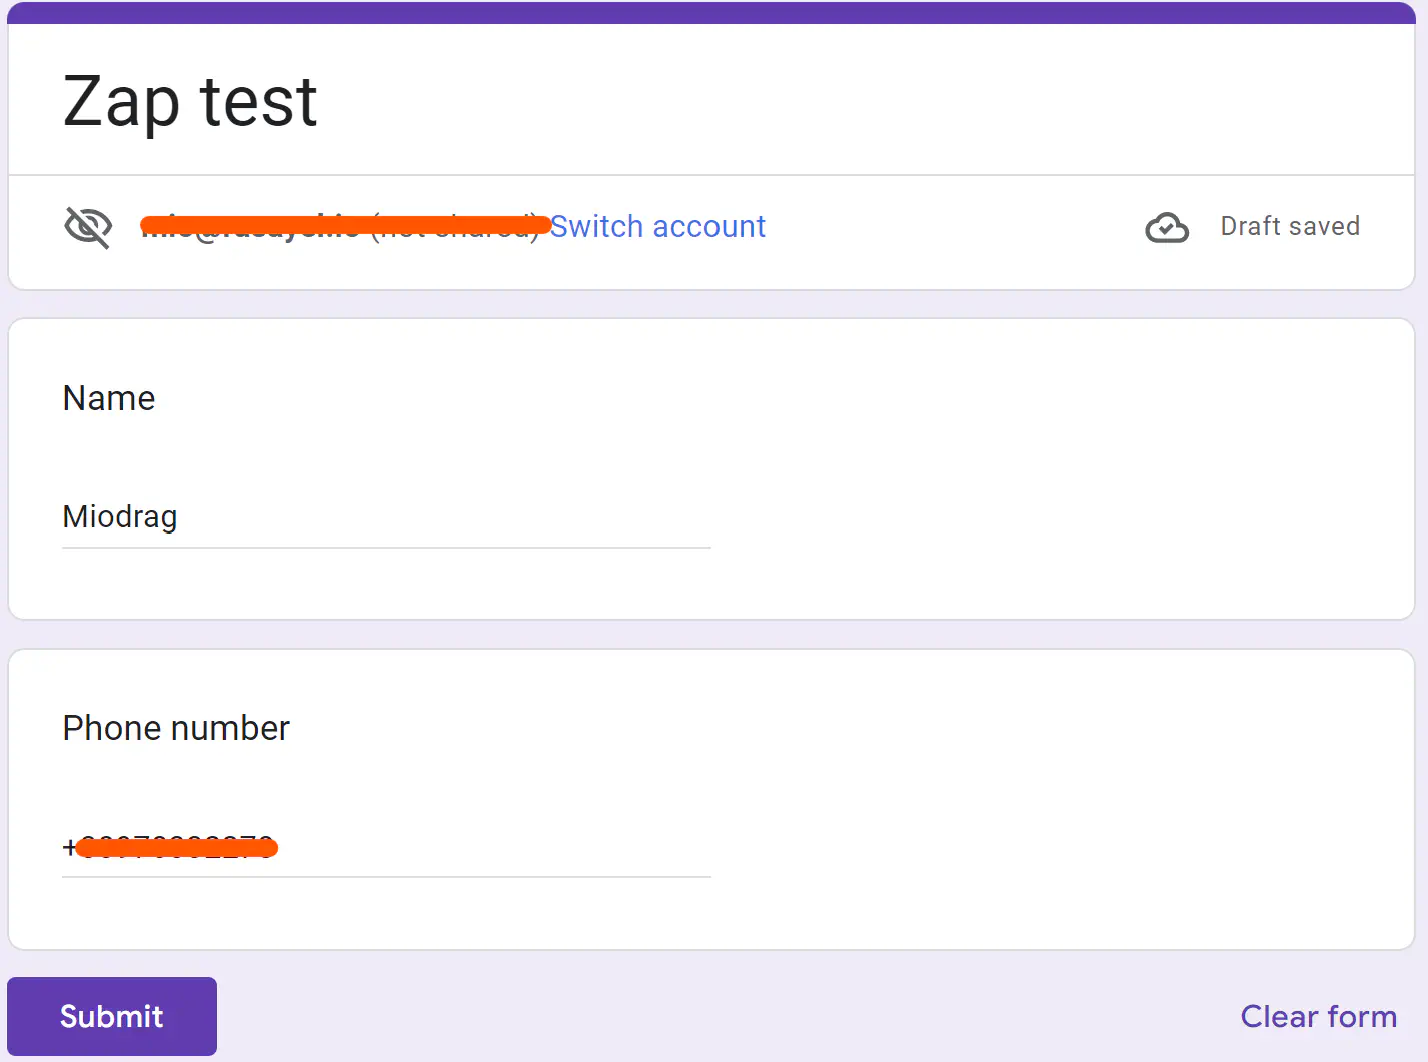 Zap test window in a Google Forms automation.